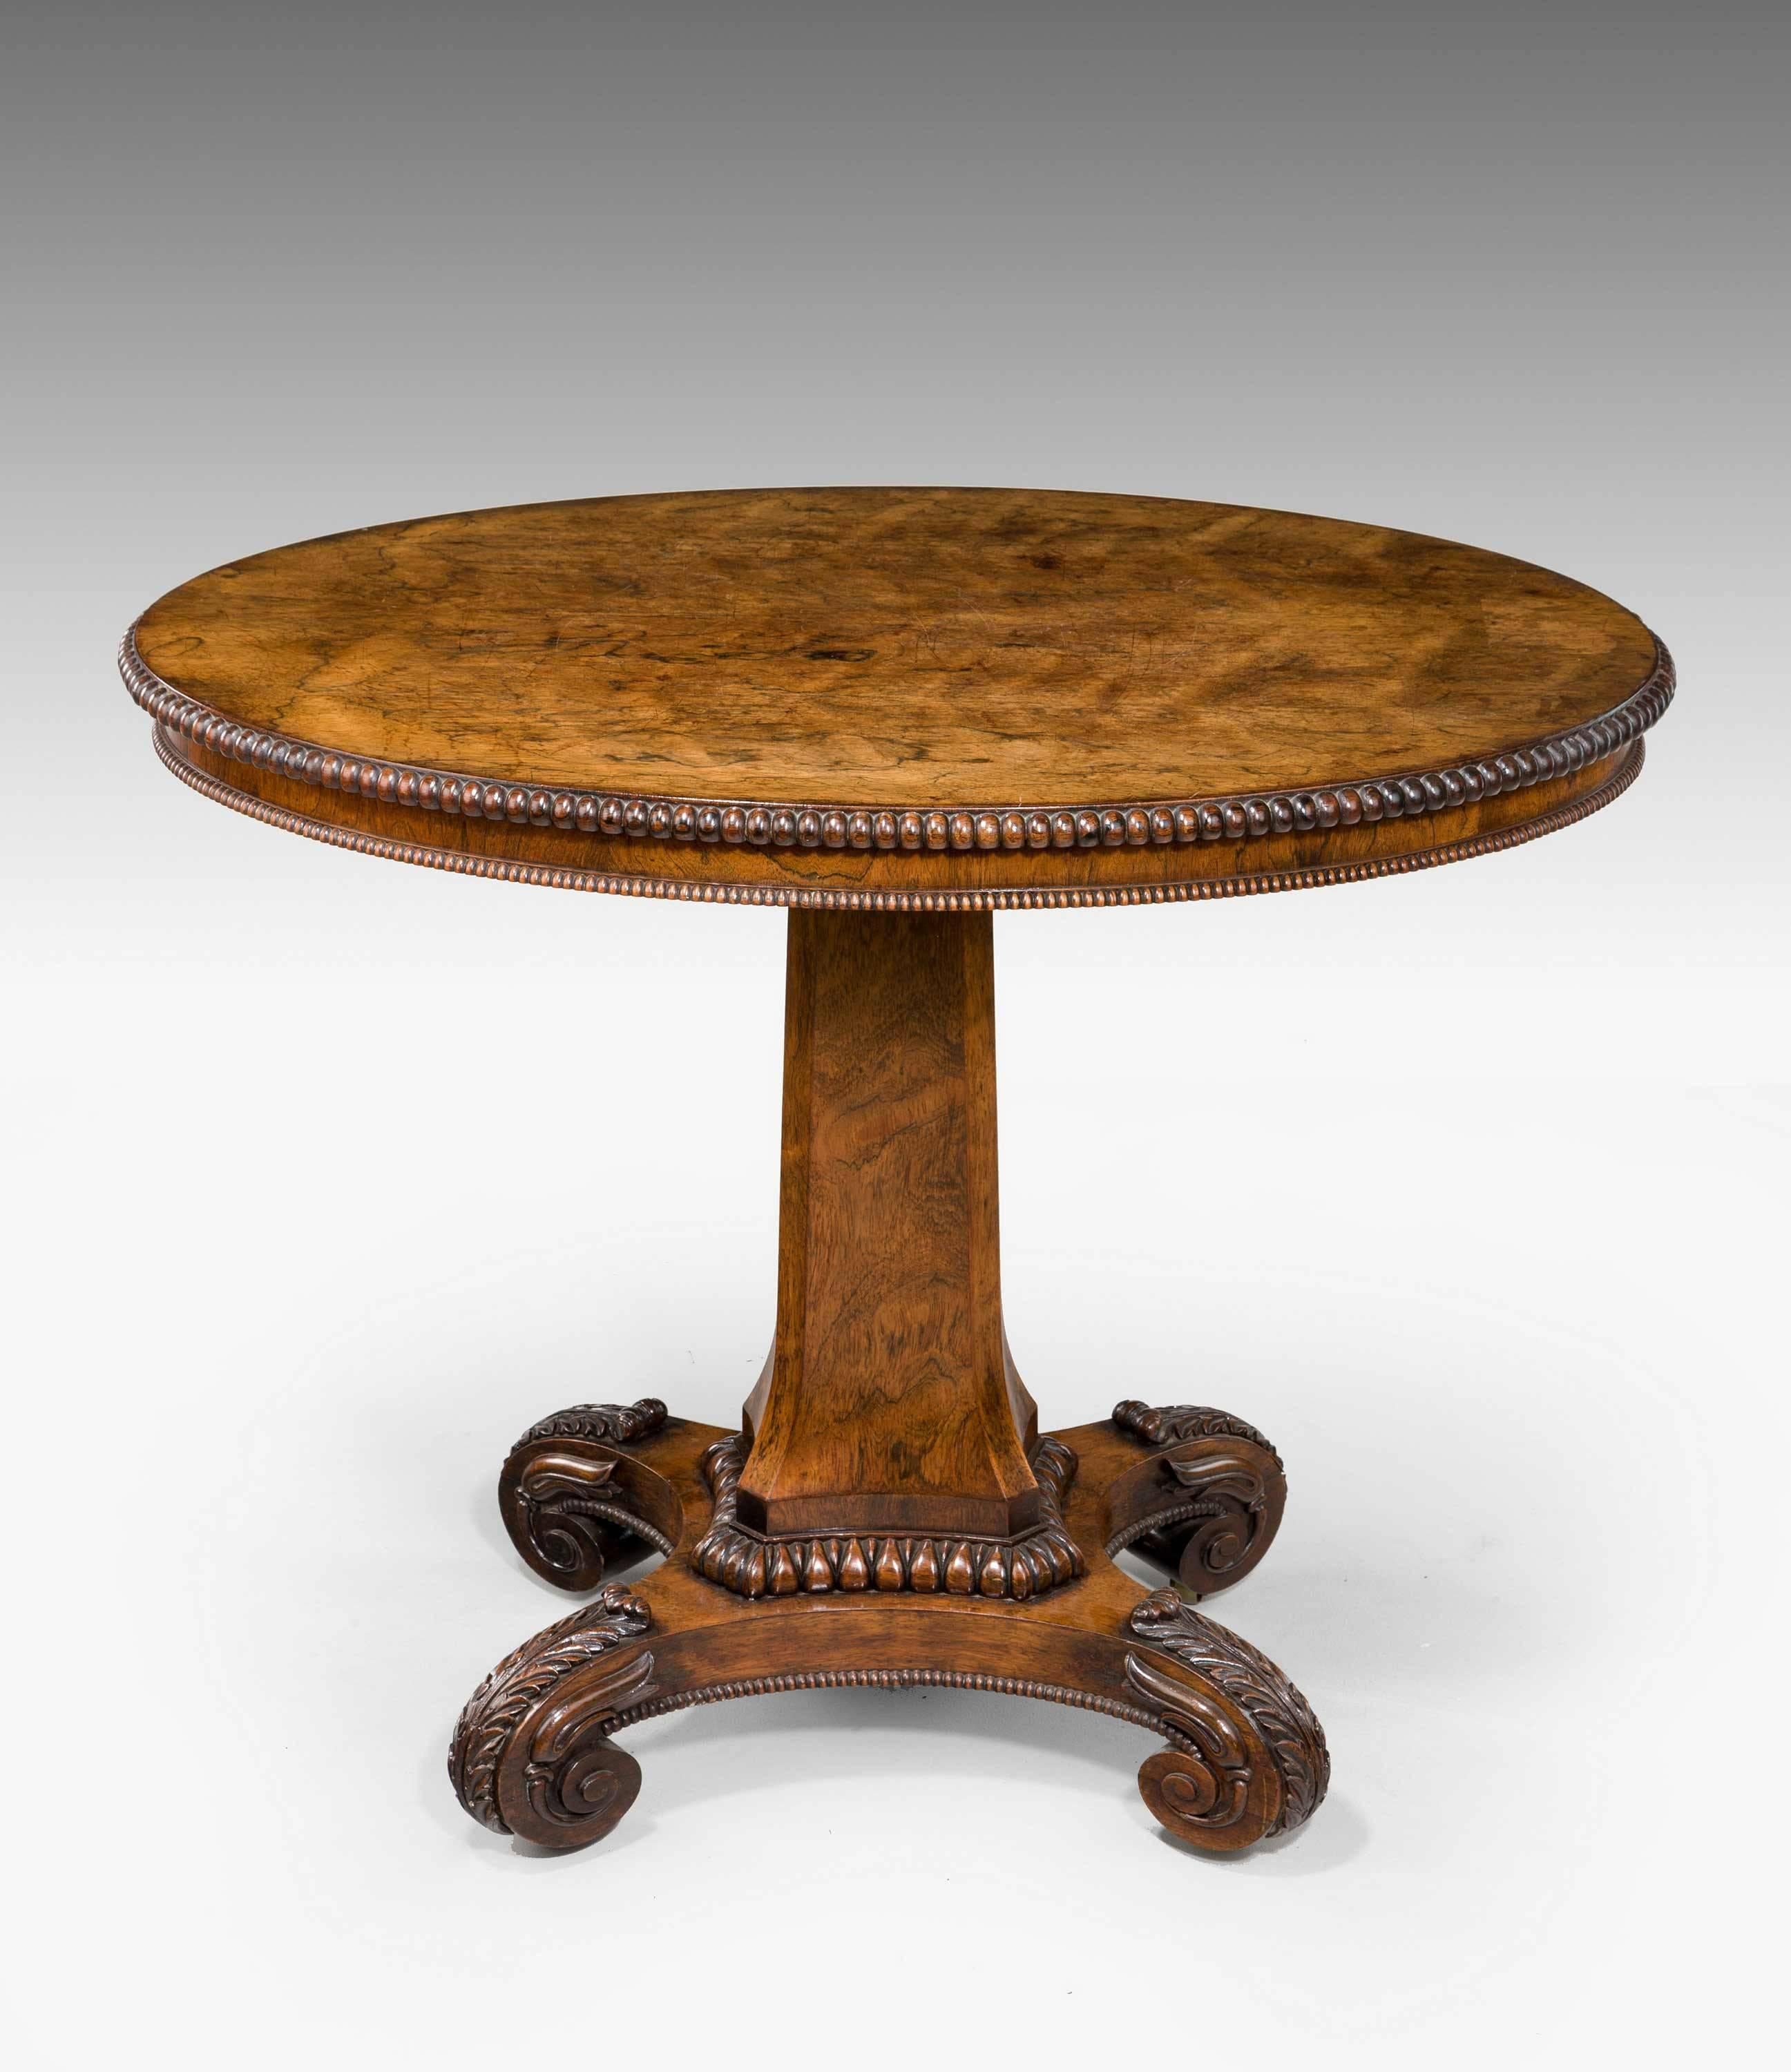 Regency period highly figured mahogany centre table of small proportions, the top with its original polished surface, the edge with semi elliptical detailing and matched on the tri form base.
    